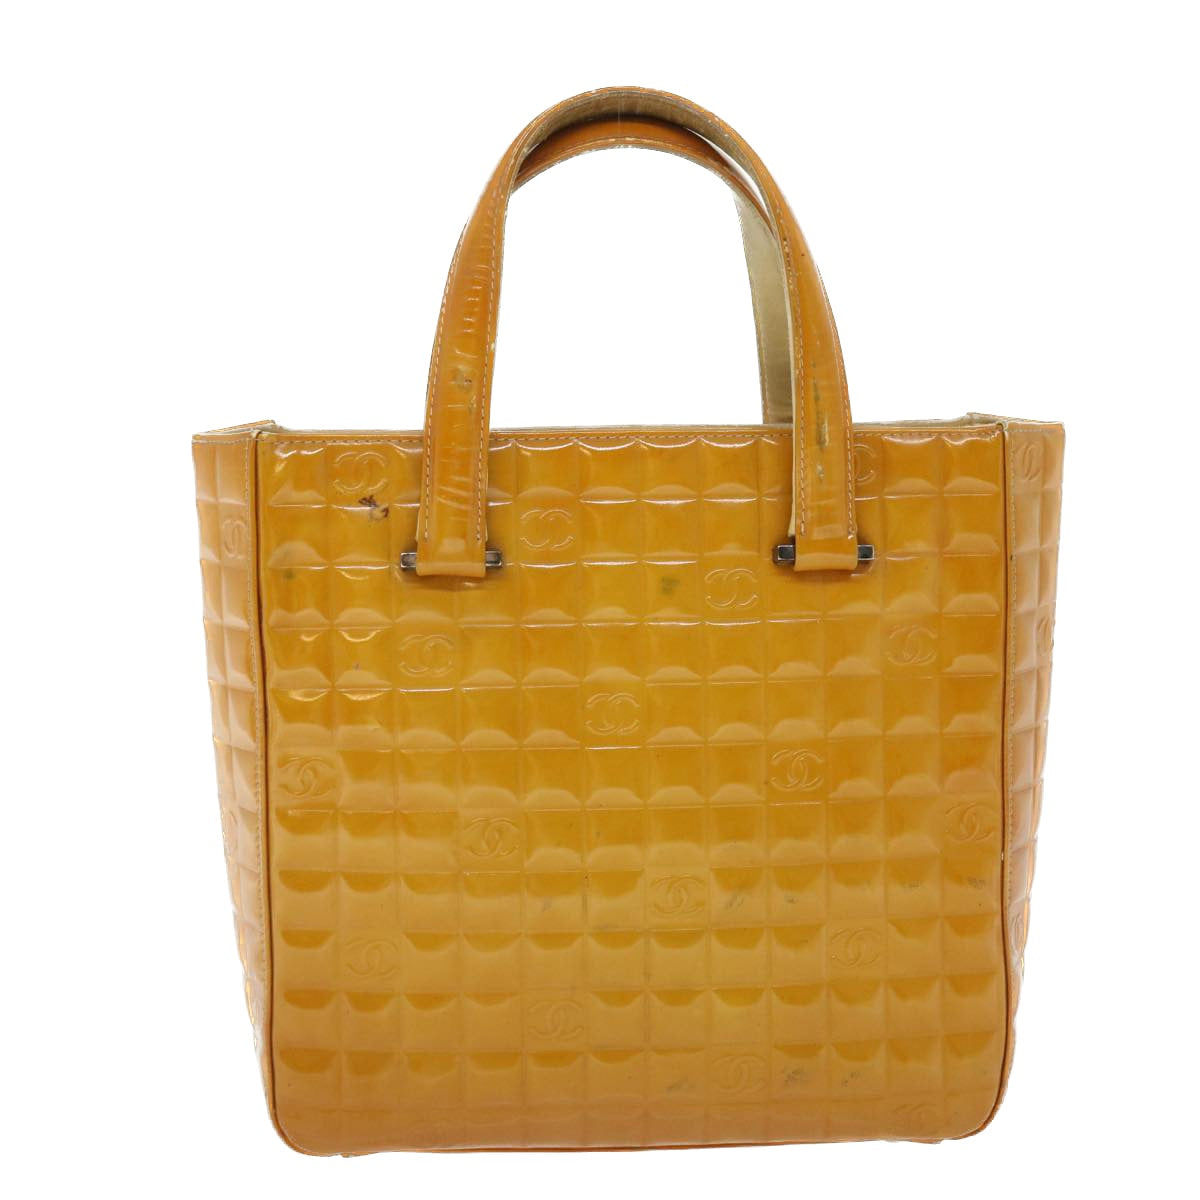 CHANEL Hand Bag Patent leather Yellow CC Auth bs7609